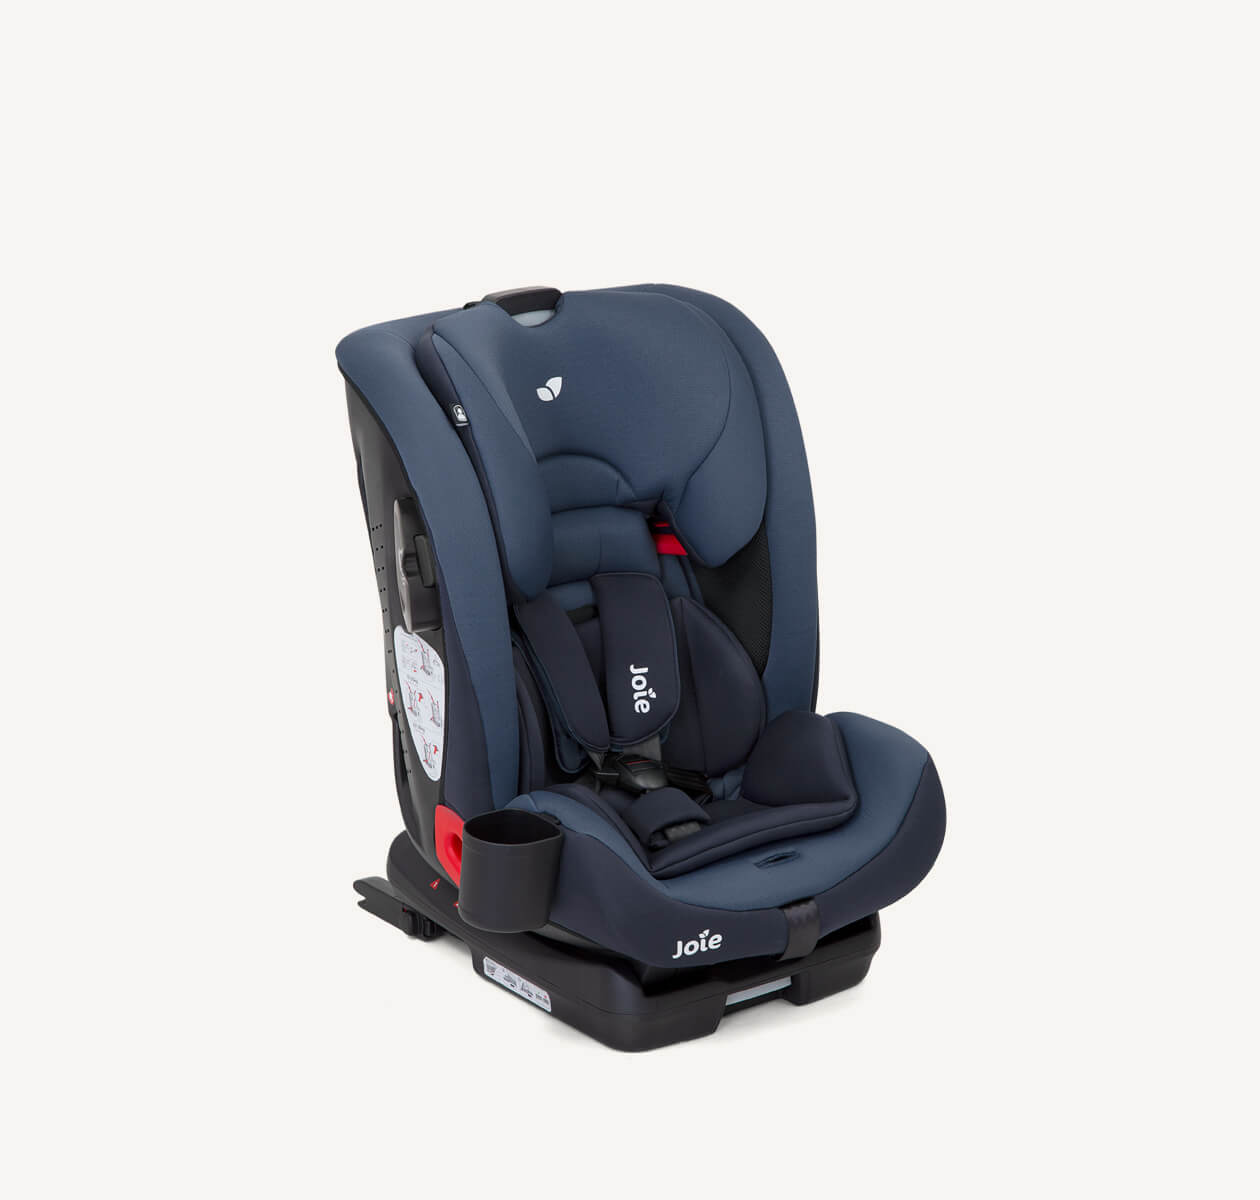 https://dd.joiebaby.com/media/catalog/product/p/1/p1-joie-toddler-child-car-seat-boldr-deep-sea-right-angle_1.jpg?type=product&height=265&width=265